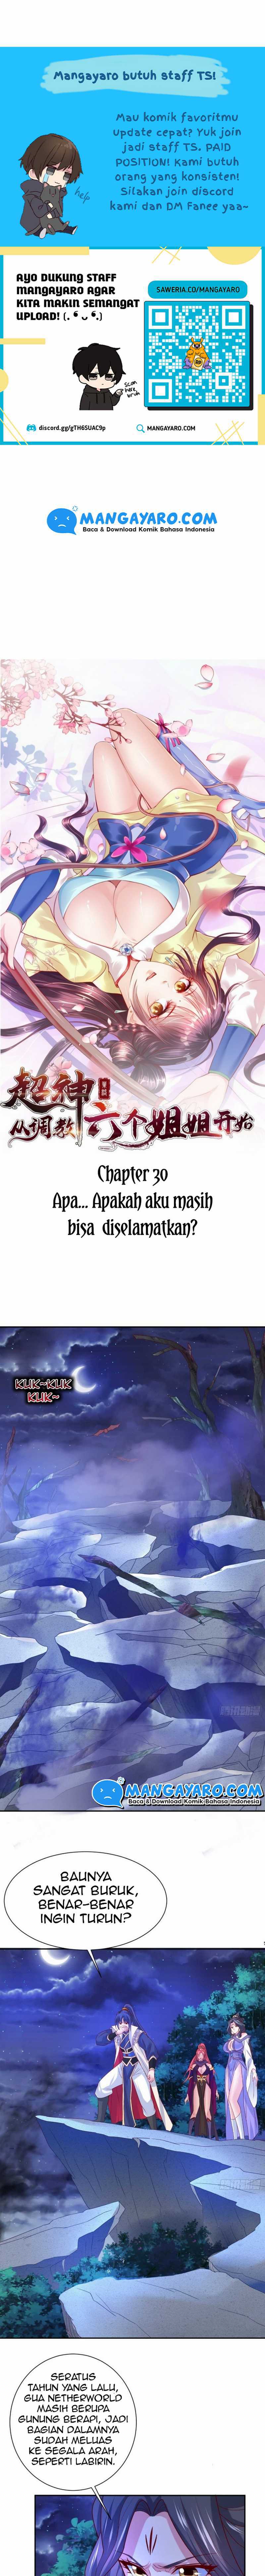 Becoming A God By Teaching Six Sisters Chapter 30